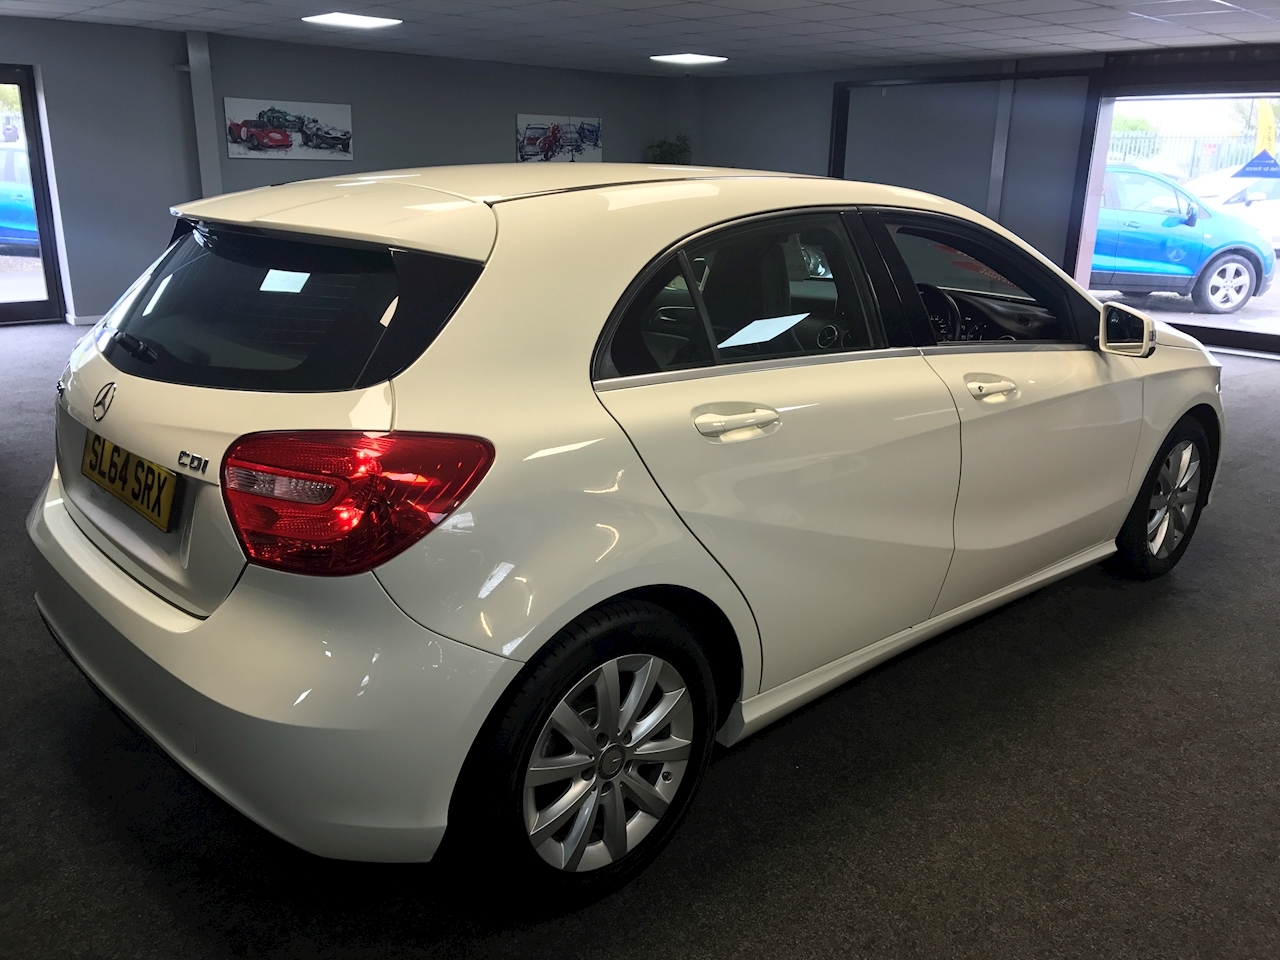 A-Class A180 Cdi Eco Edition Se Hatchback 1.5 Manual Diesel